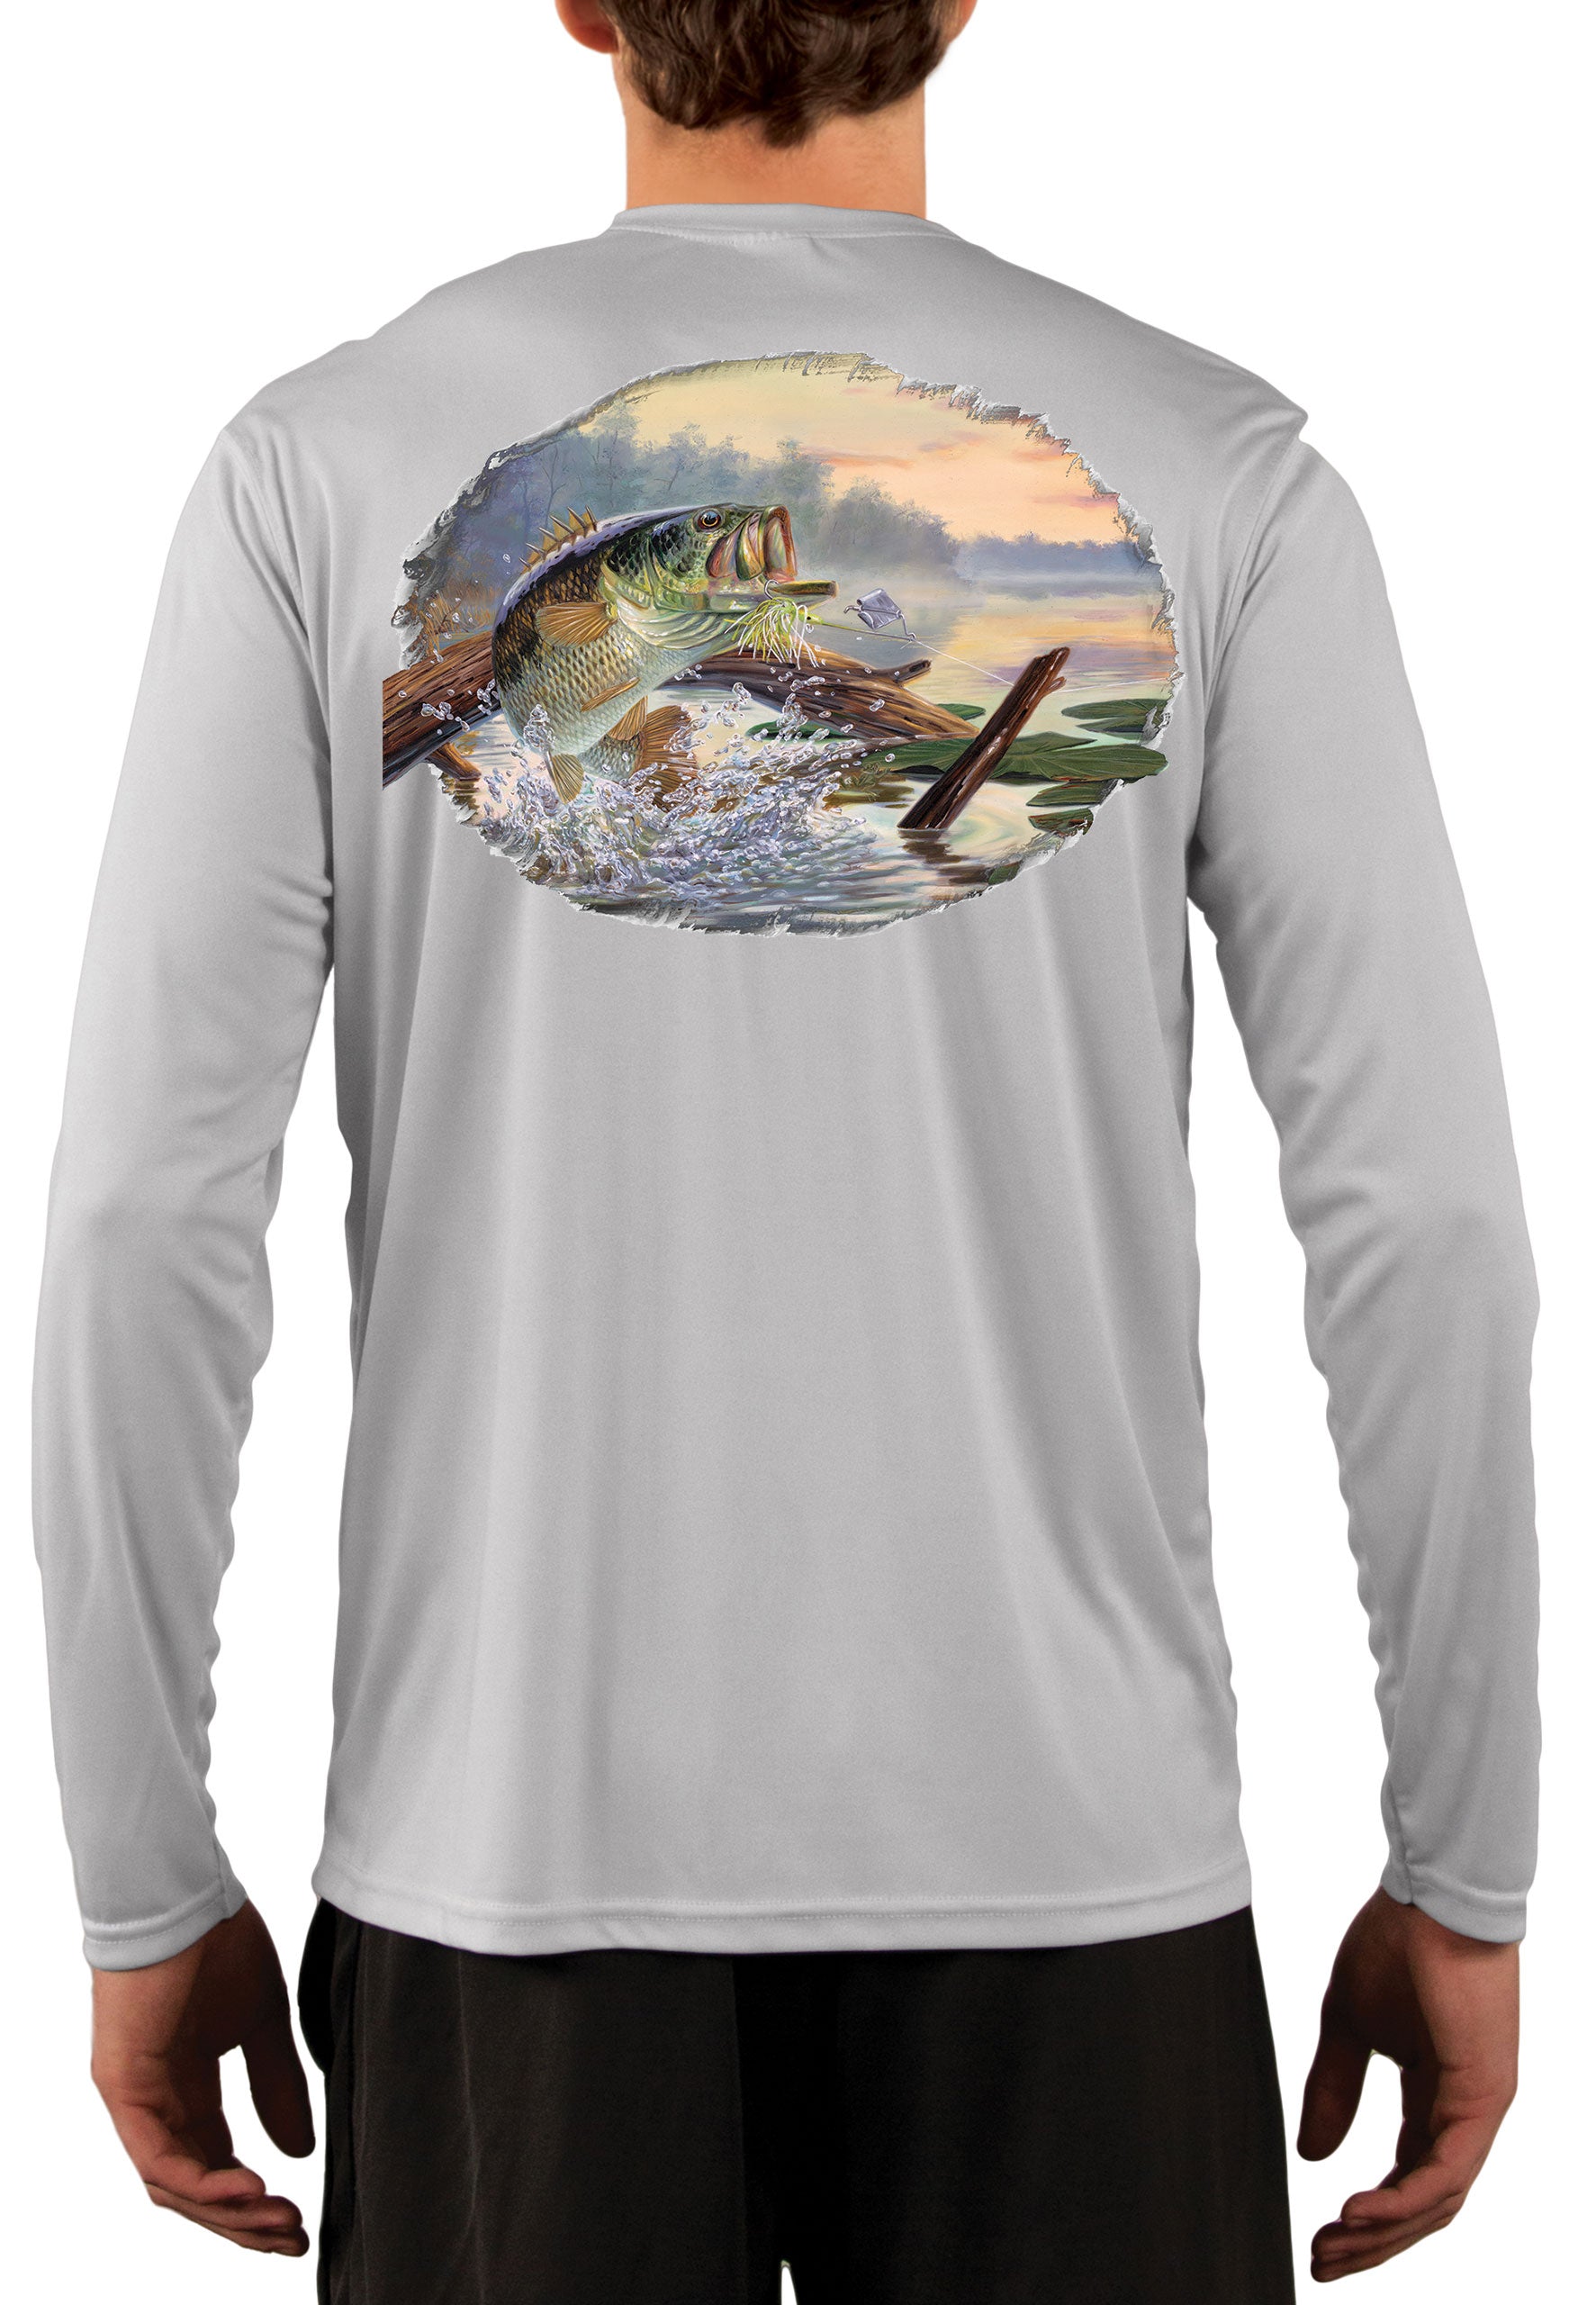 Large Mouth Bass Men's Fishing Shirts - Long Sleeve, Moisture Wicking, Non-fade Print, 50+ UPF Fabric UV Protection Pearl Gray / Small